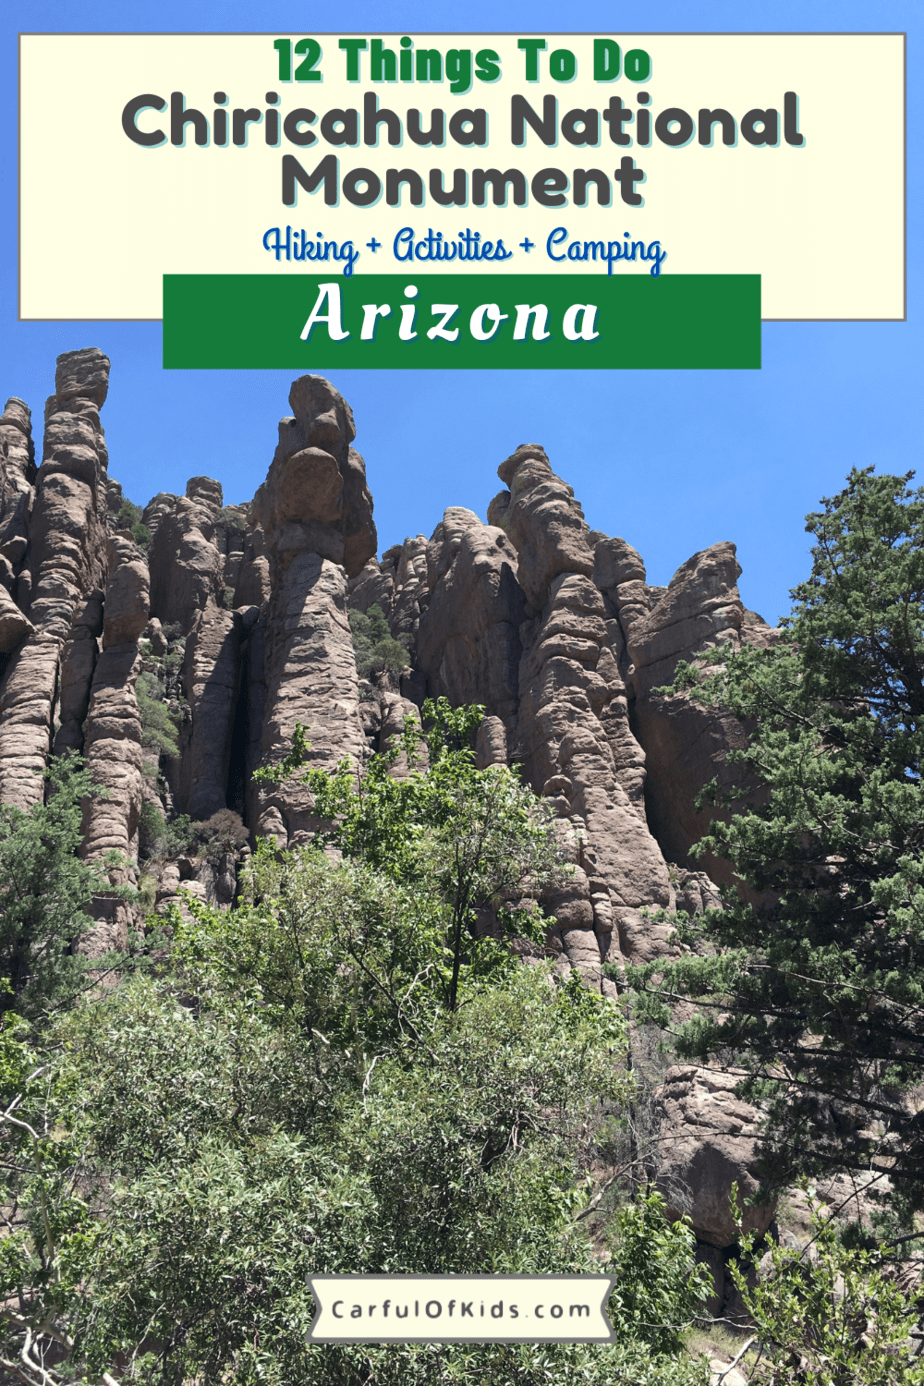 Located in southern Arizona near the New Mexico border, Chiricahua National Monument is an ideal road trip stop along Interstate 10. It features a scenic drive, hiking and picnic spots. Here are the top activities in Chiricahua National Monument. Parks along Interstate 10 in Arizona. #NationalParks